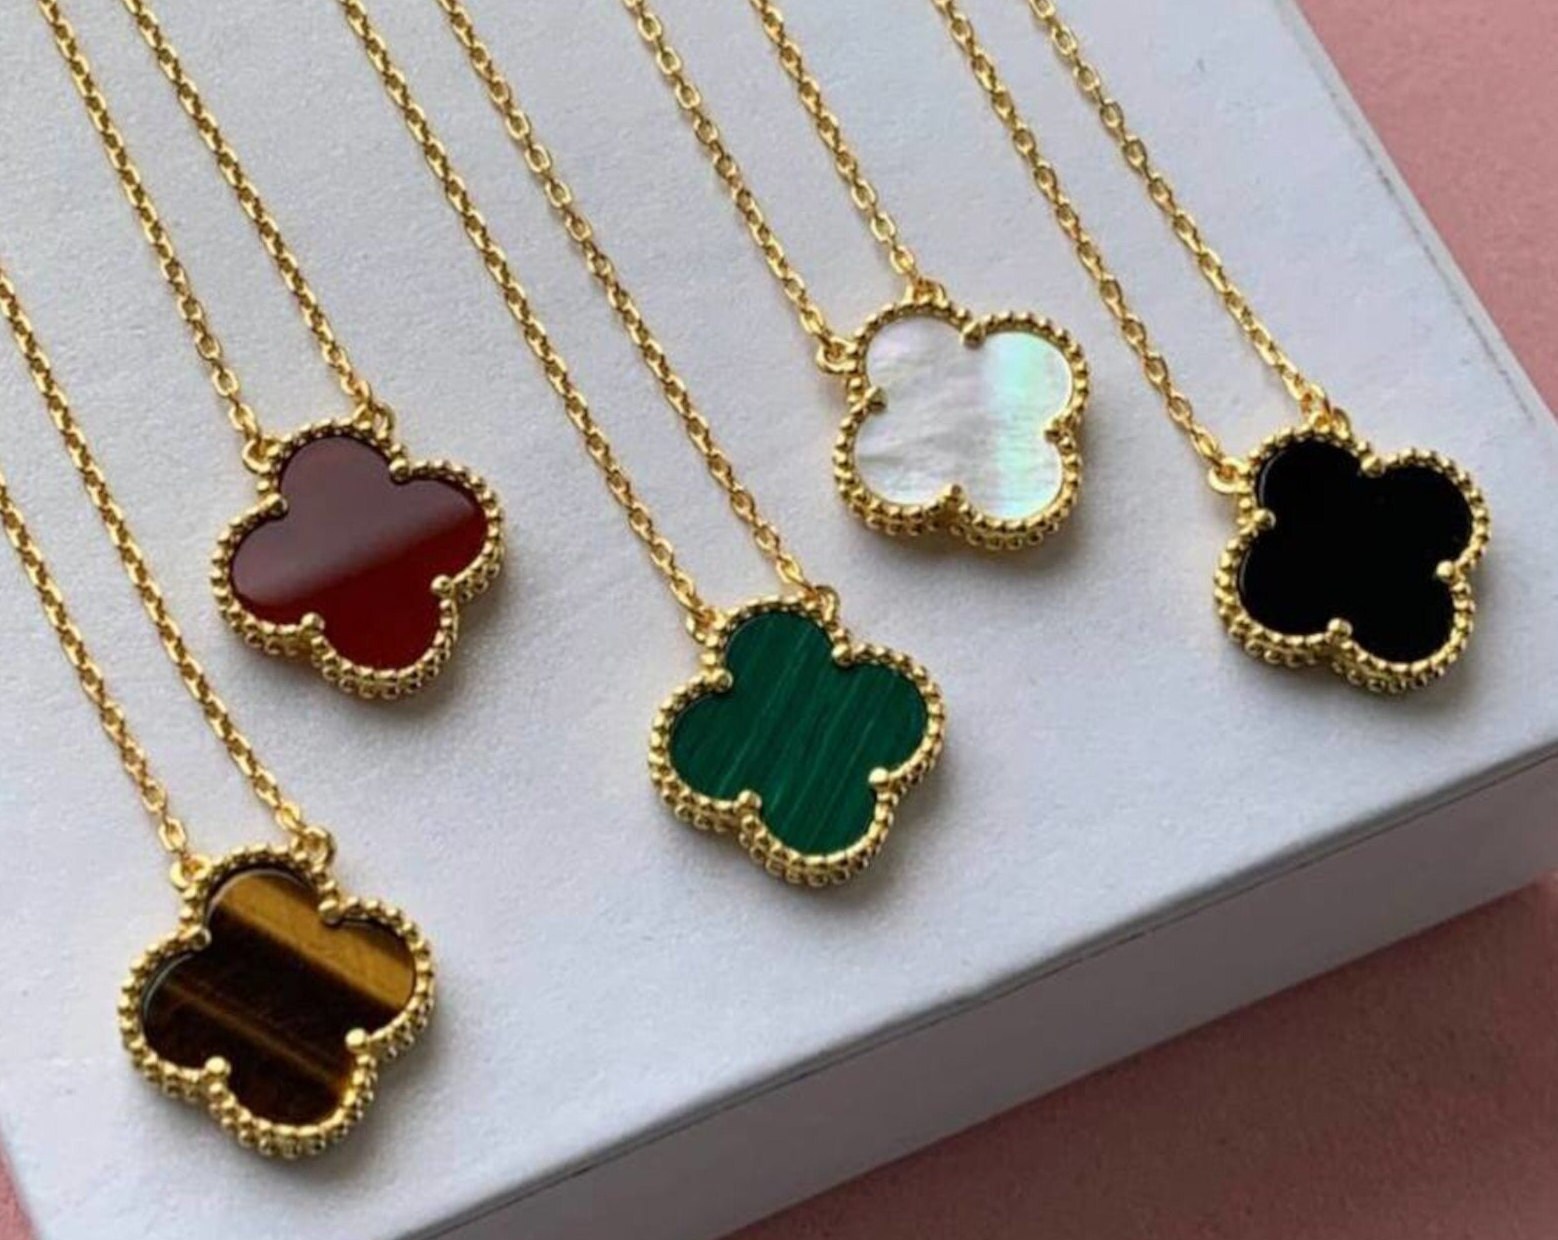 7 FAB Van Cleef Necklace Dupe Picks That Look Real